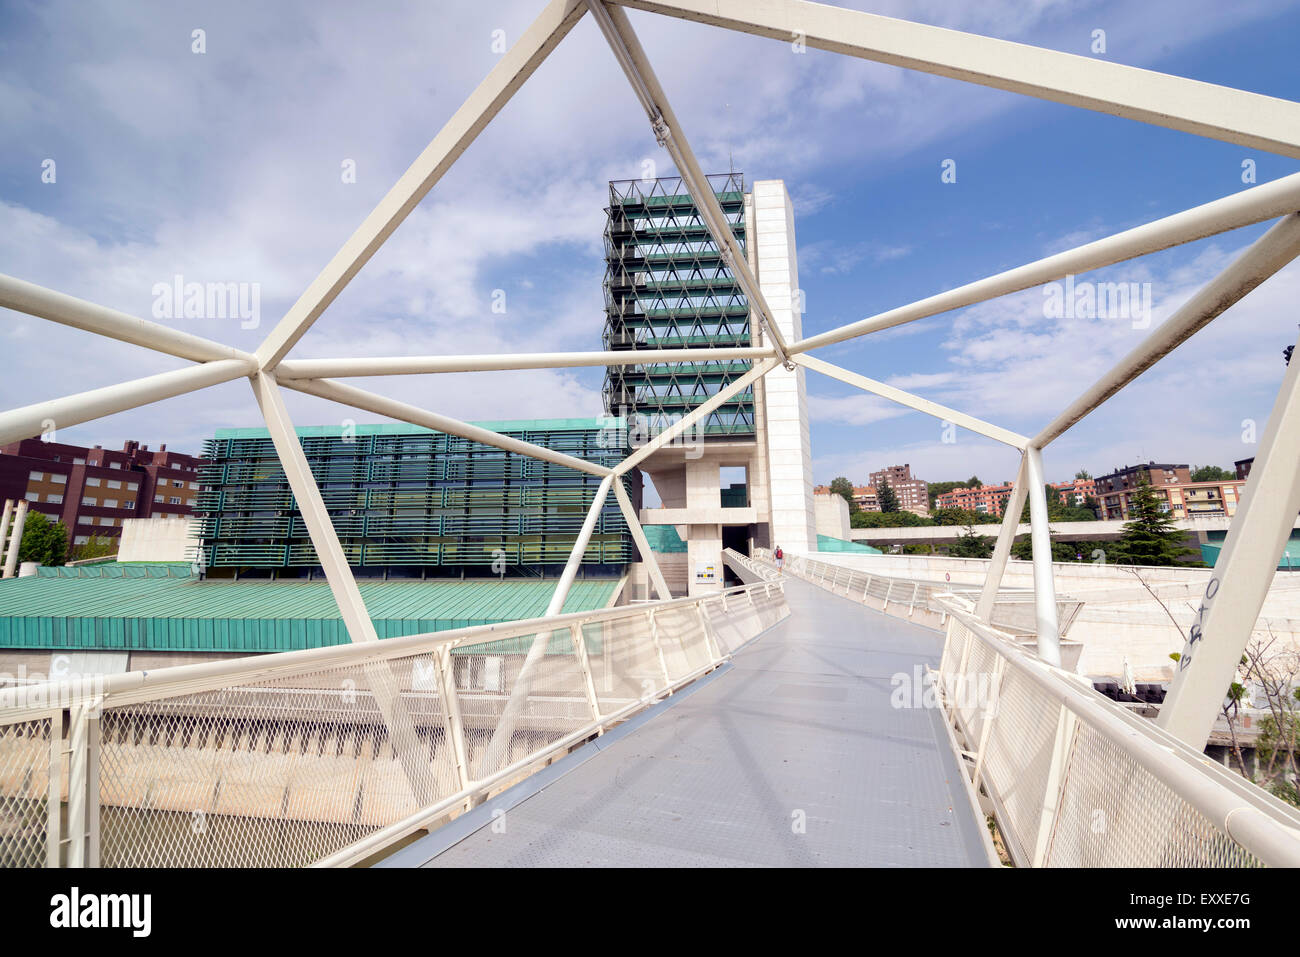 VALLADOLID, SPAIN - JULY 17, 2015: Valladolid Science Museum was opened in May 2003. Stock Photo